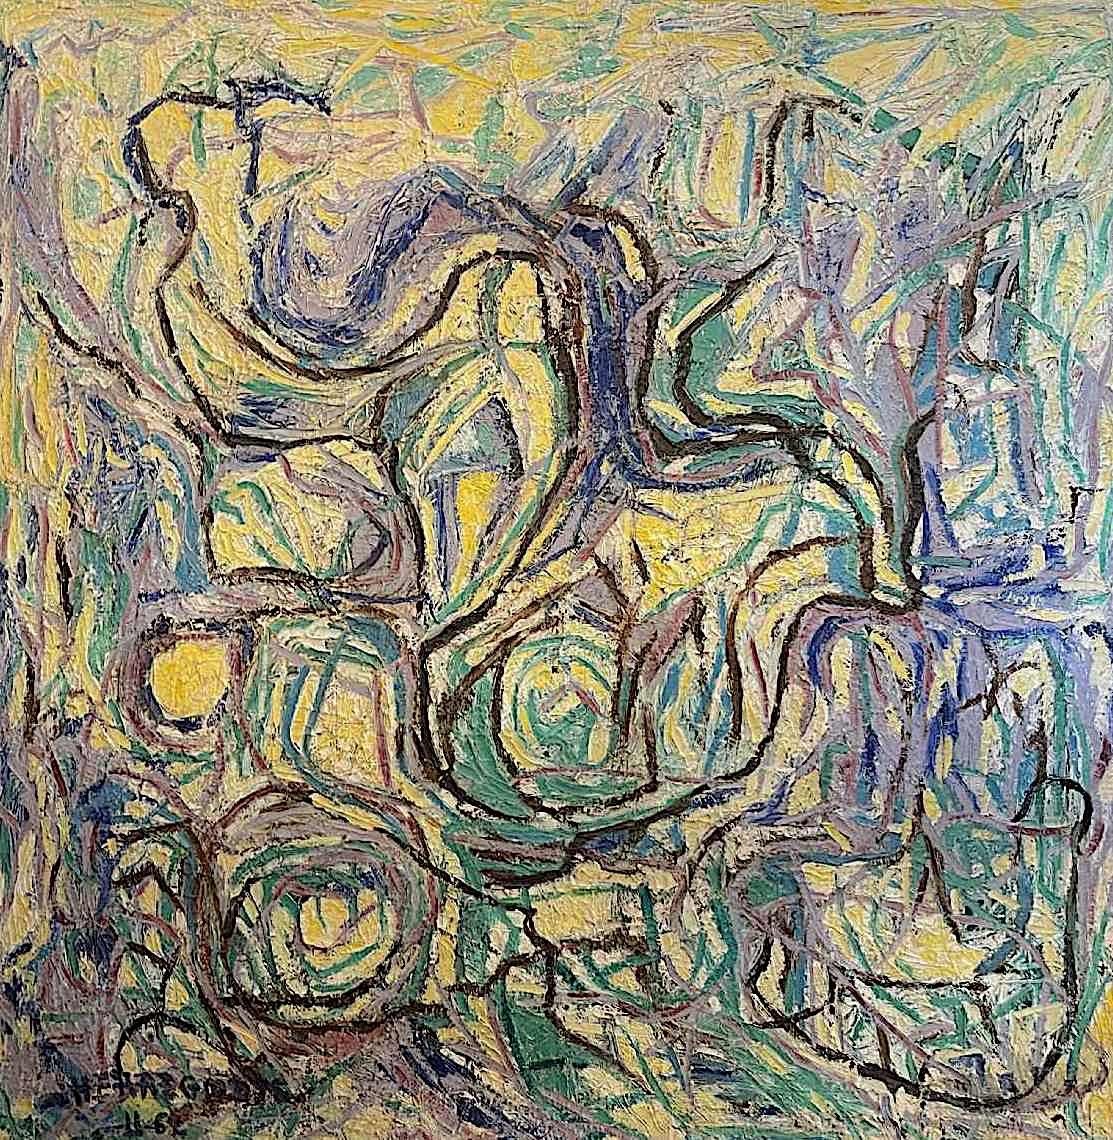 Urbain Herregodts (90x92cm) Abstract Painting From 1962, Oil On Panel